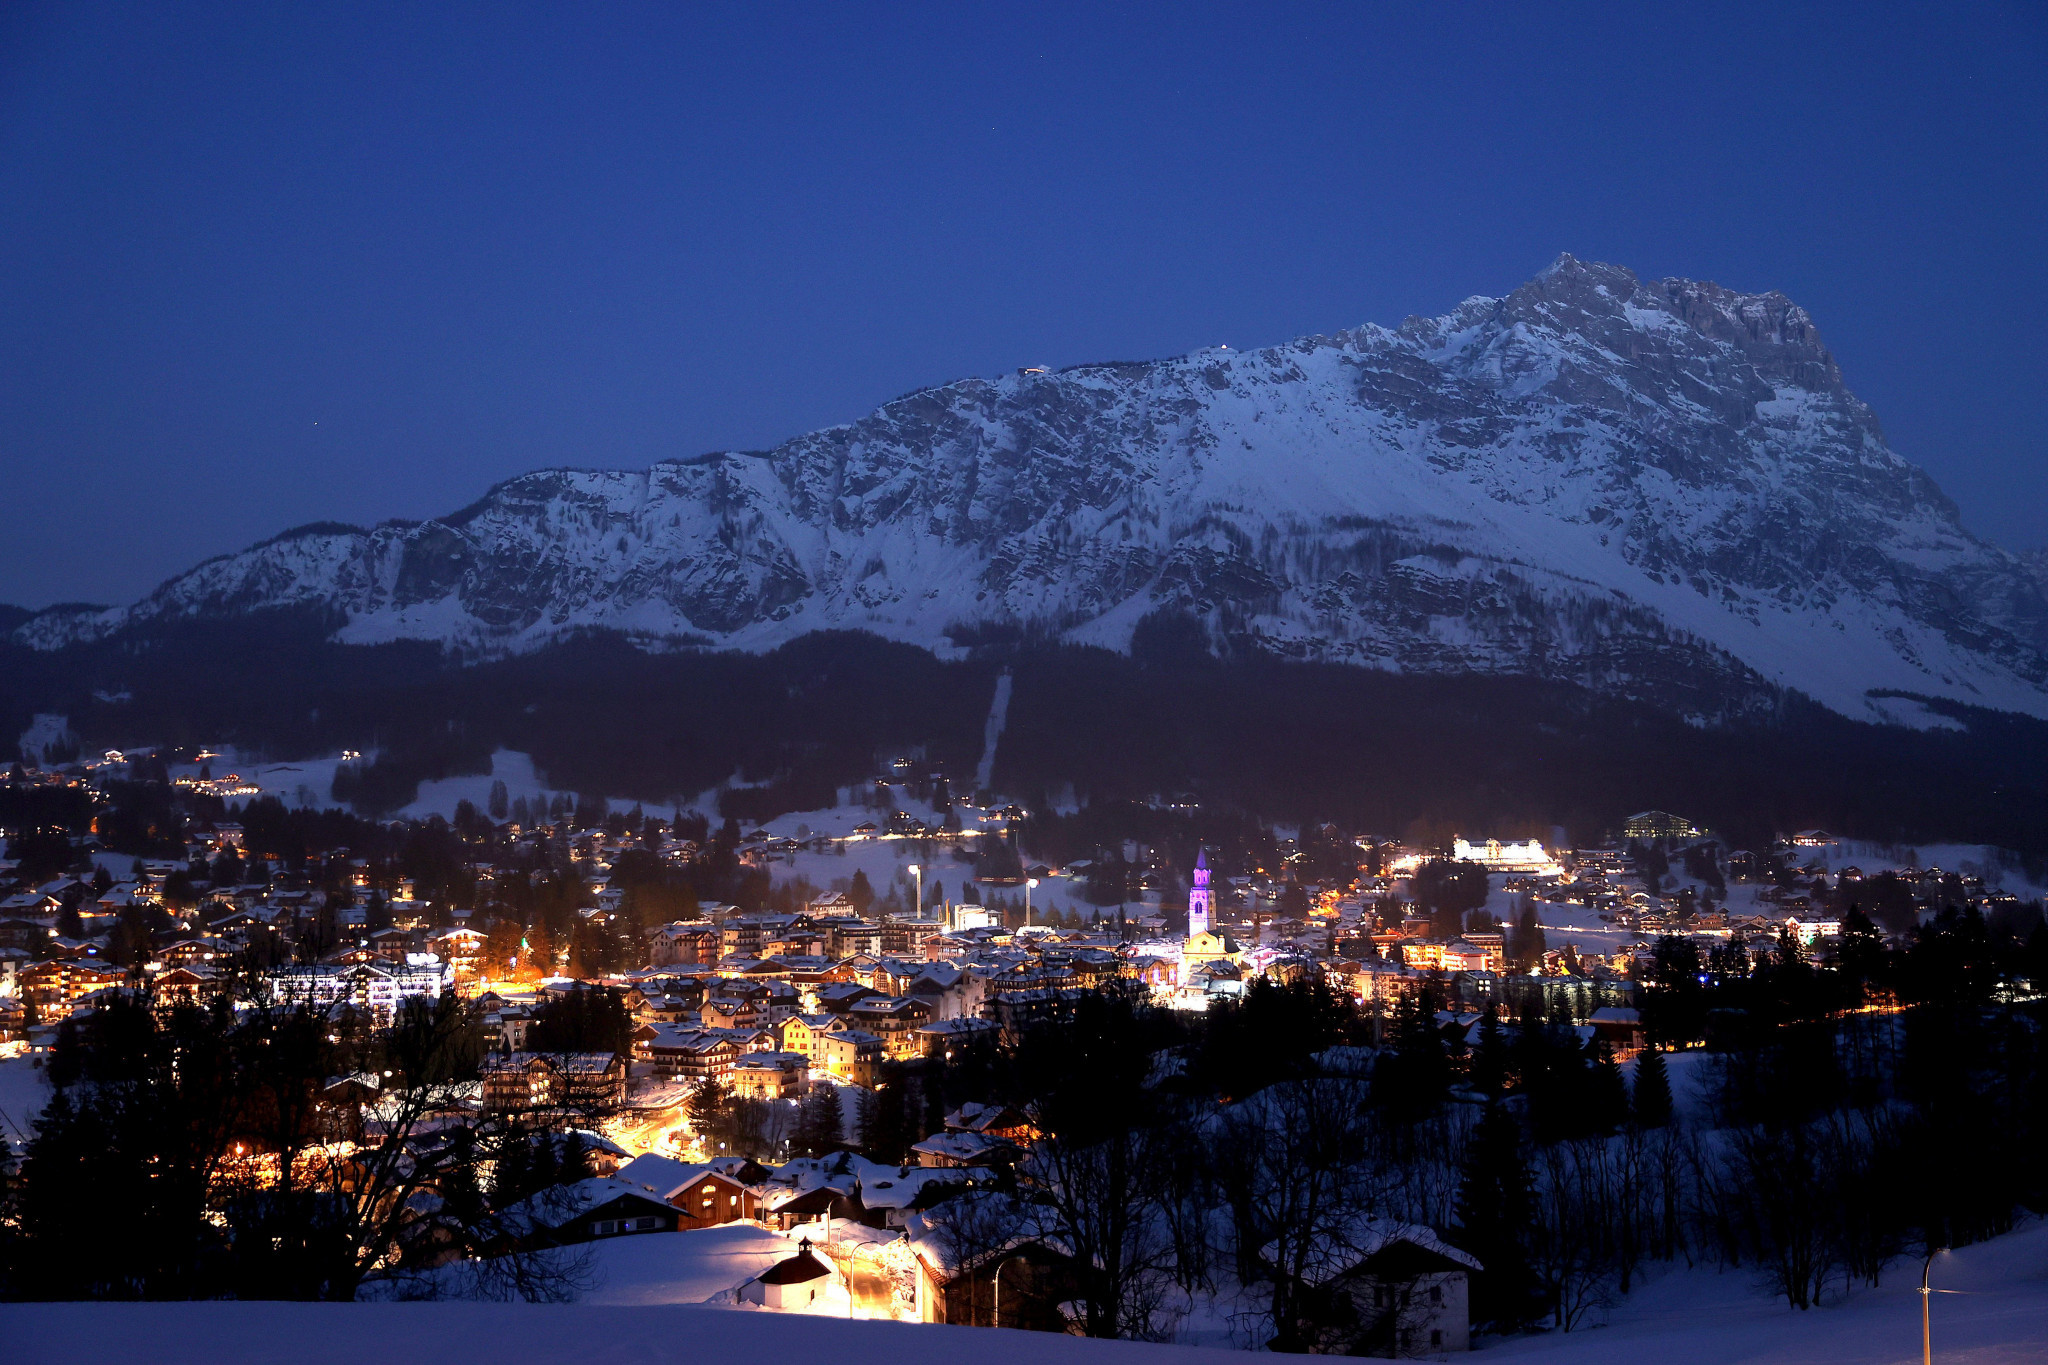 Cortina d'Ampezzo is set for a new luge, skeleton and bobsleigh facility ©Getty Images